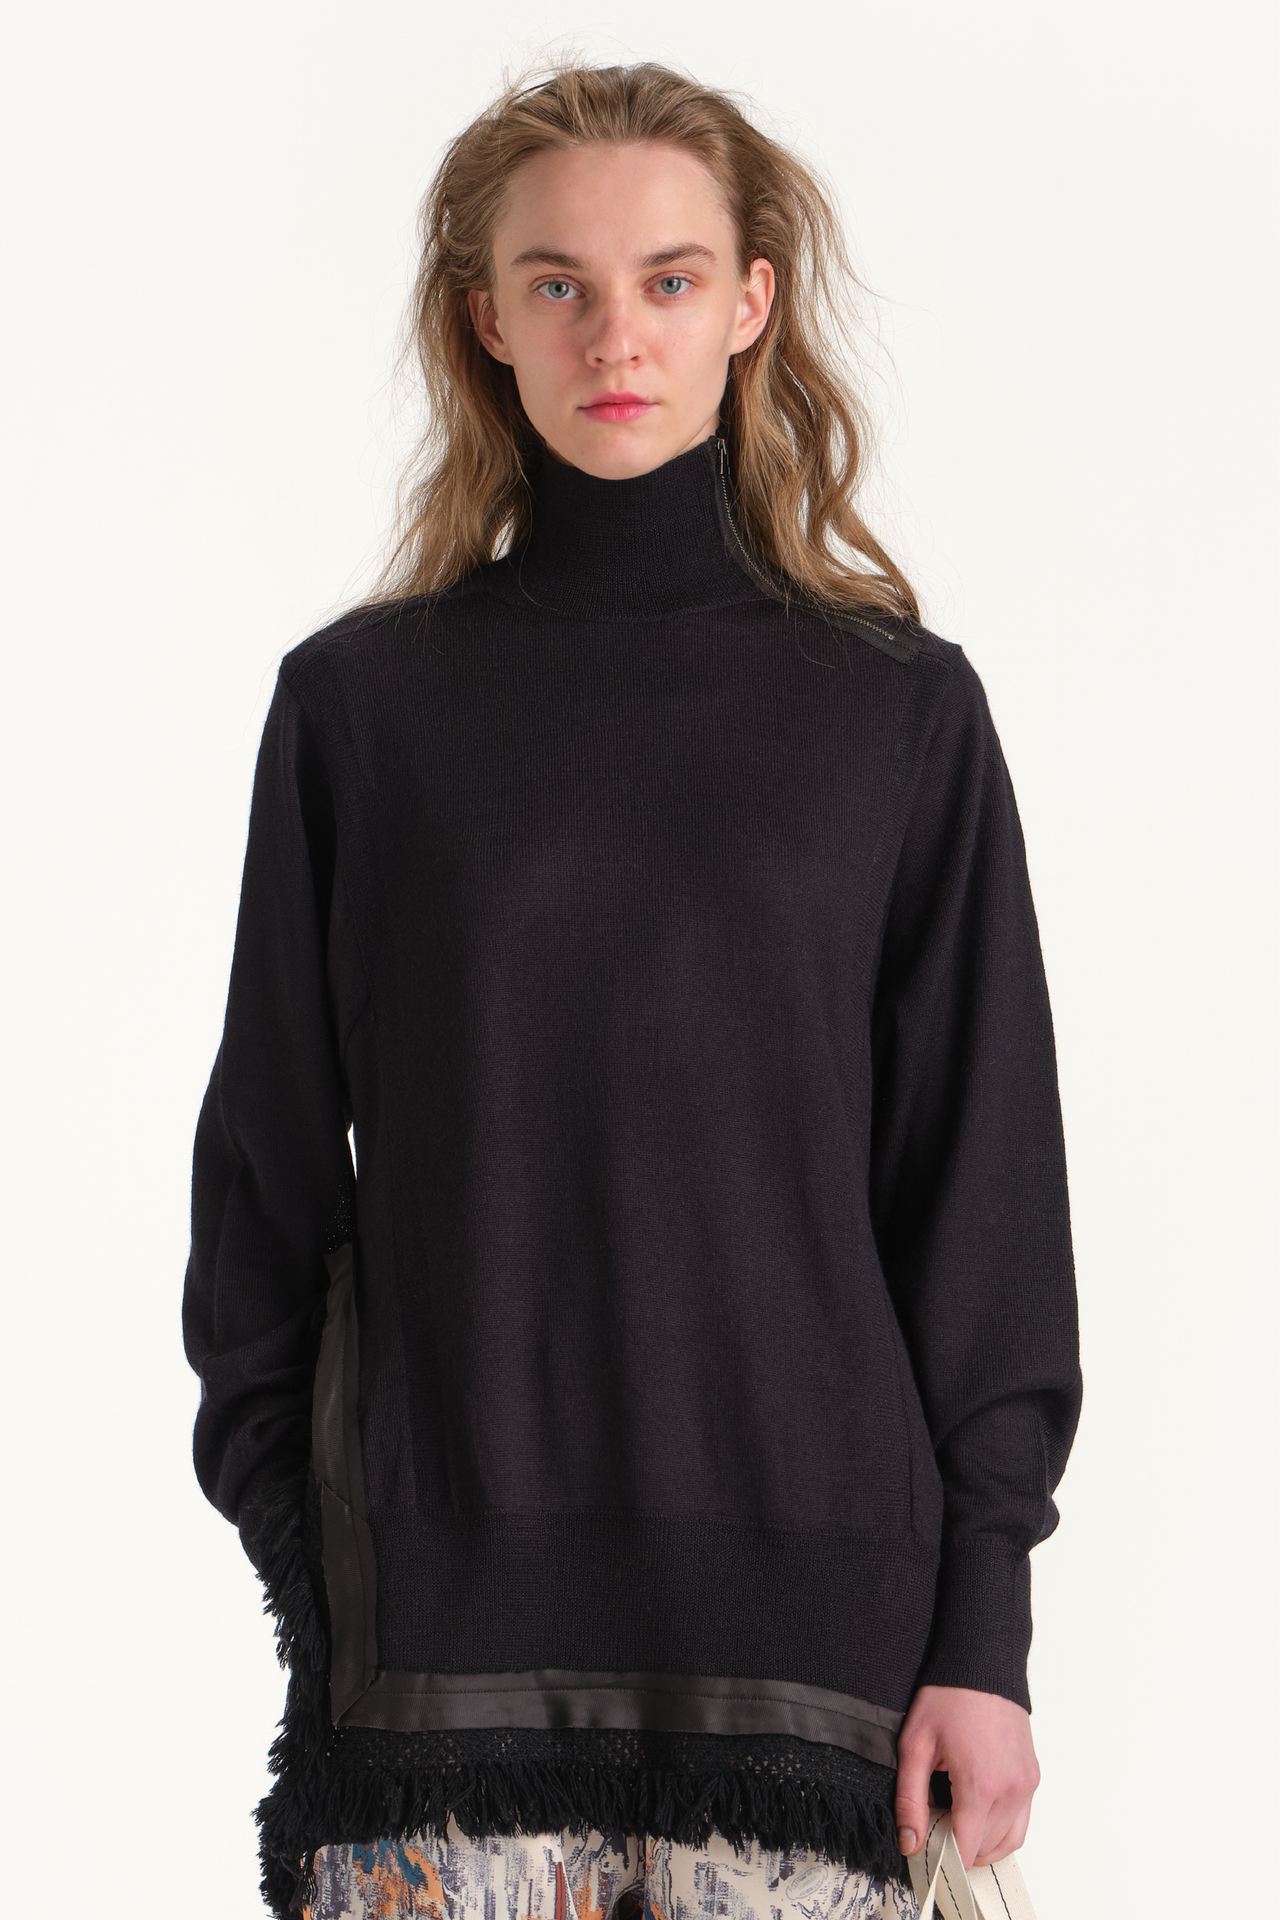 Combination Layered Turtleneck Knit – PONTI OFFICIAL STORE